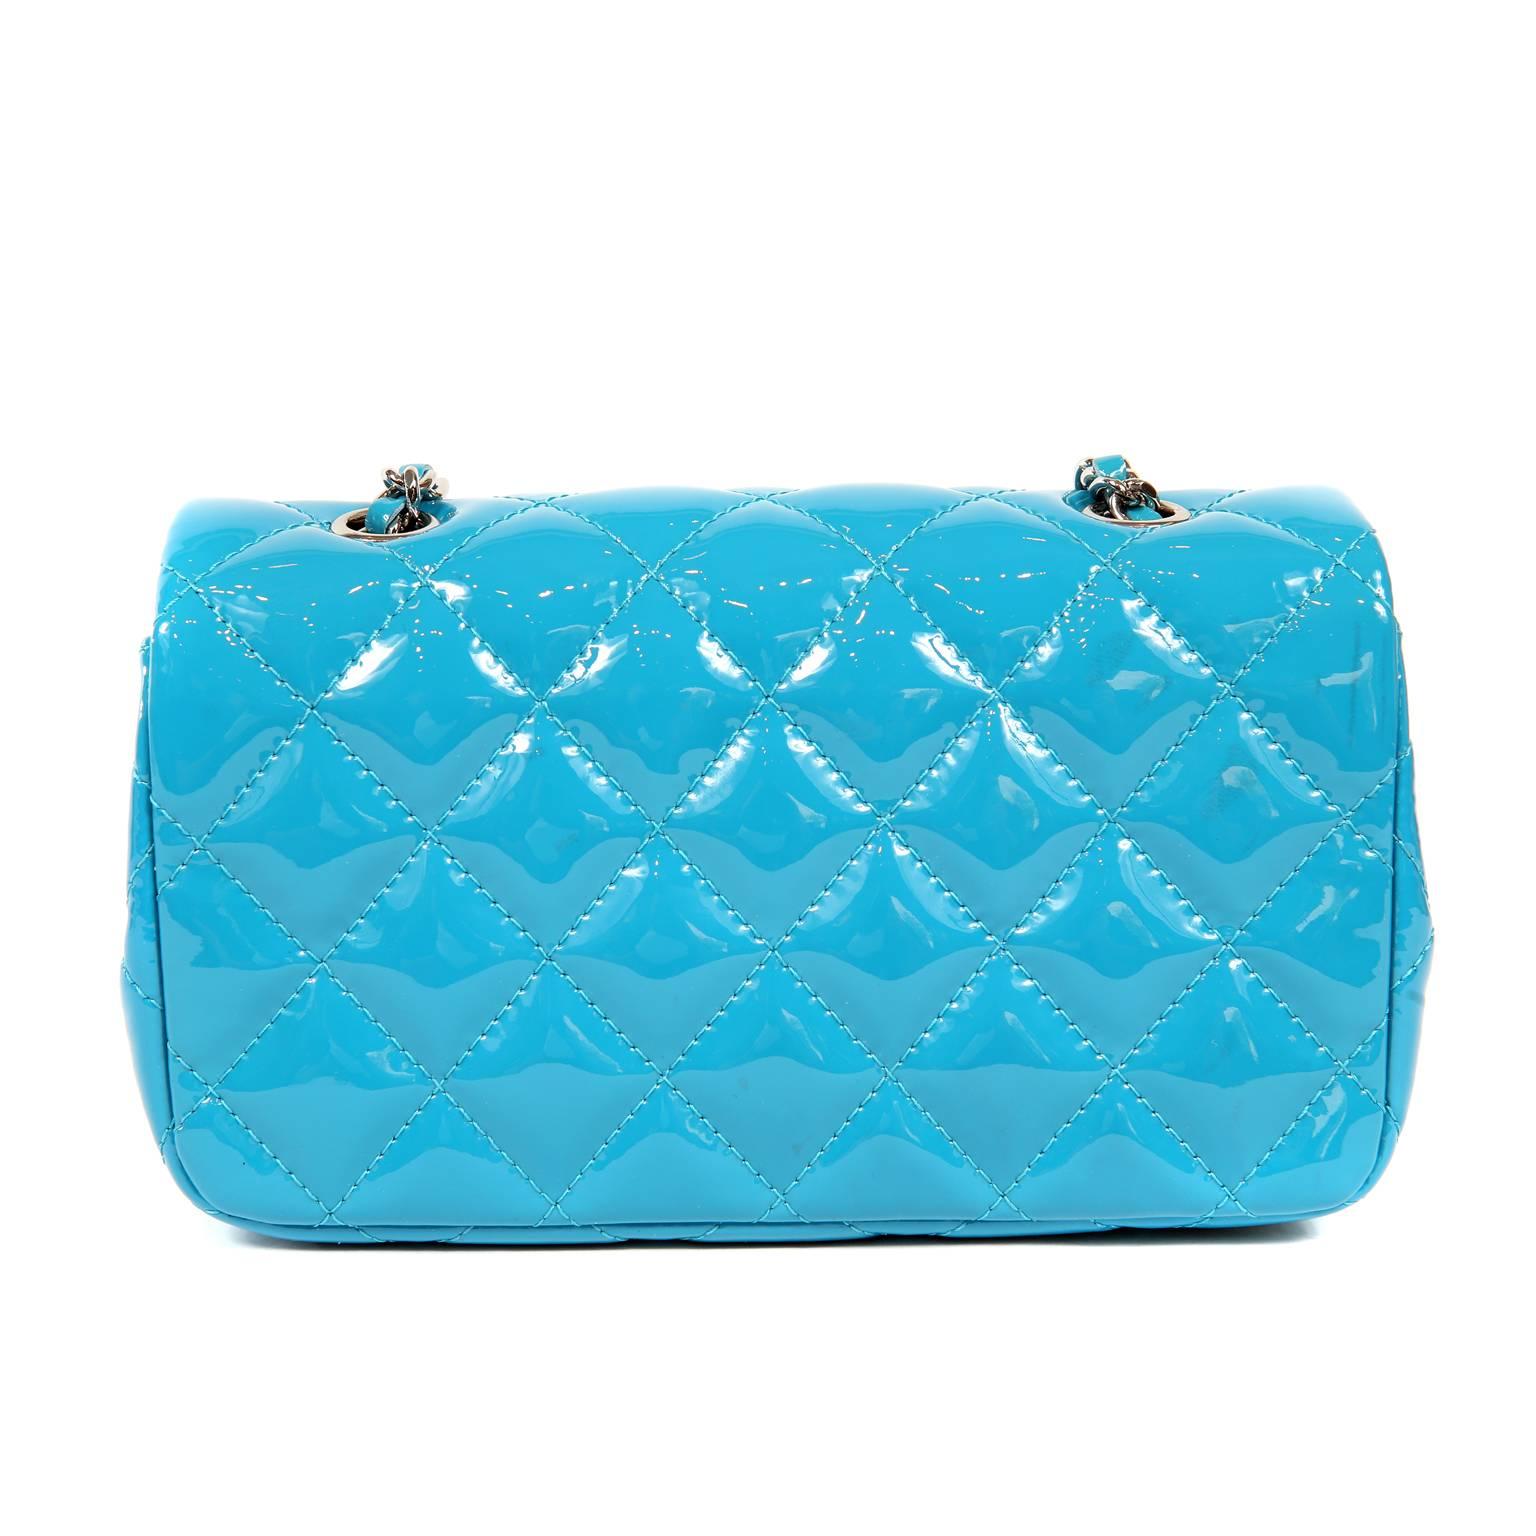 Chanel Turquoise Patent Leather Mini Classic- Excellent Condition
  In a truly stunning shade of turquoise, it’s certain to become a fast favorite in any wardrobe.
Turquoise patent leather is quilted in signature Chanel diamond stitched pattern. 